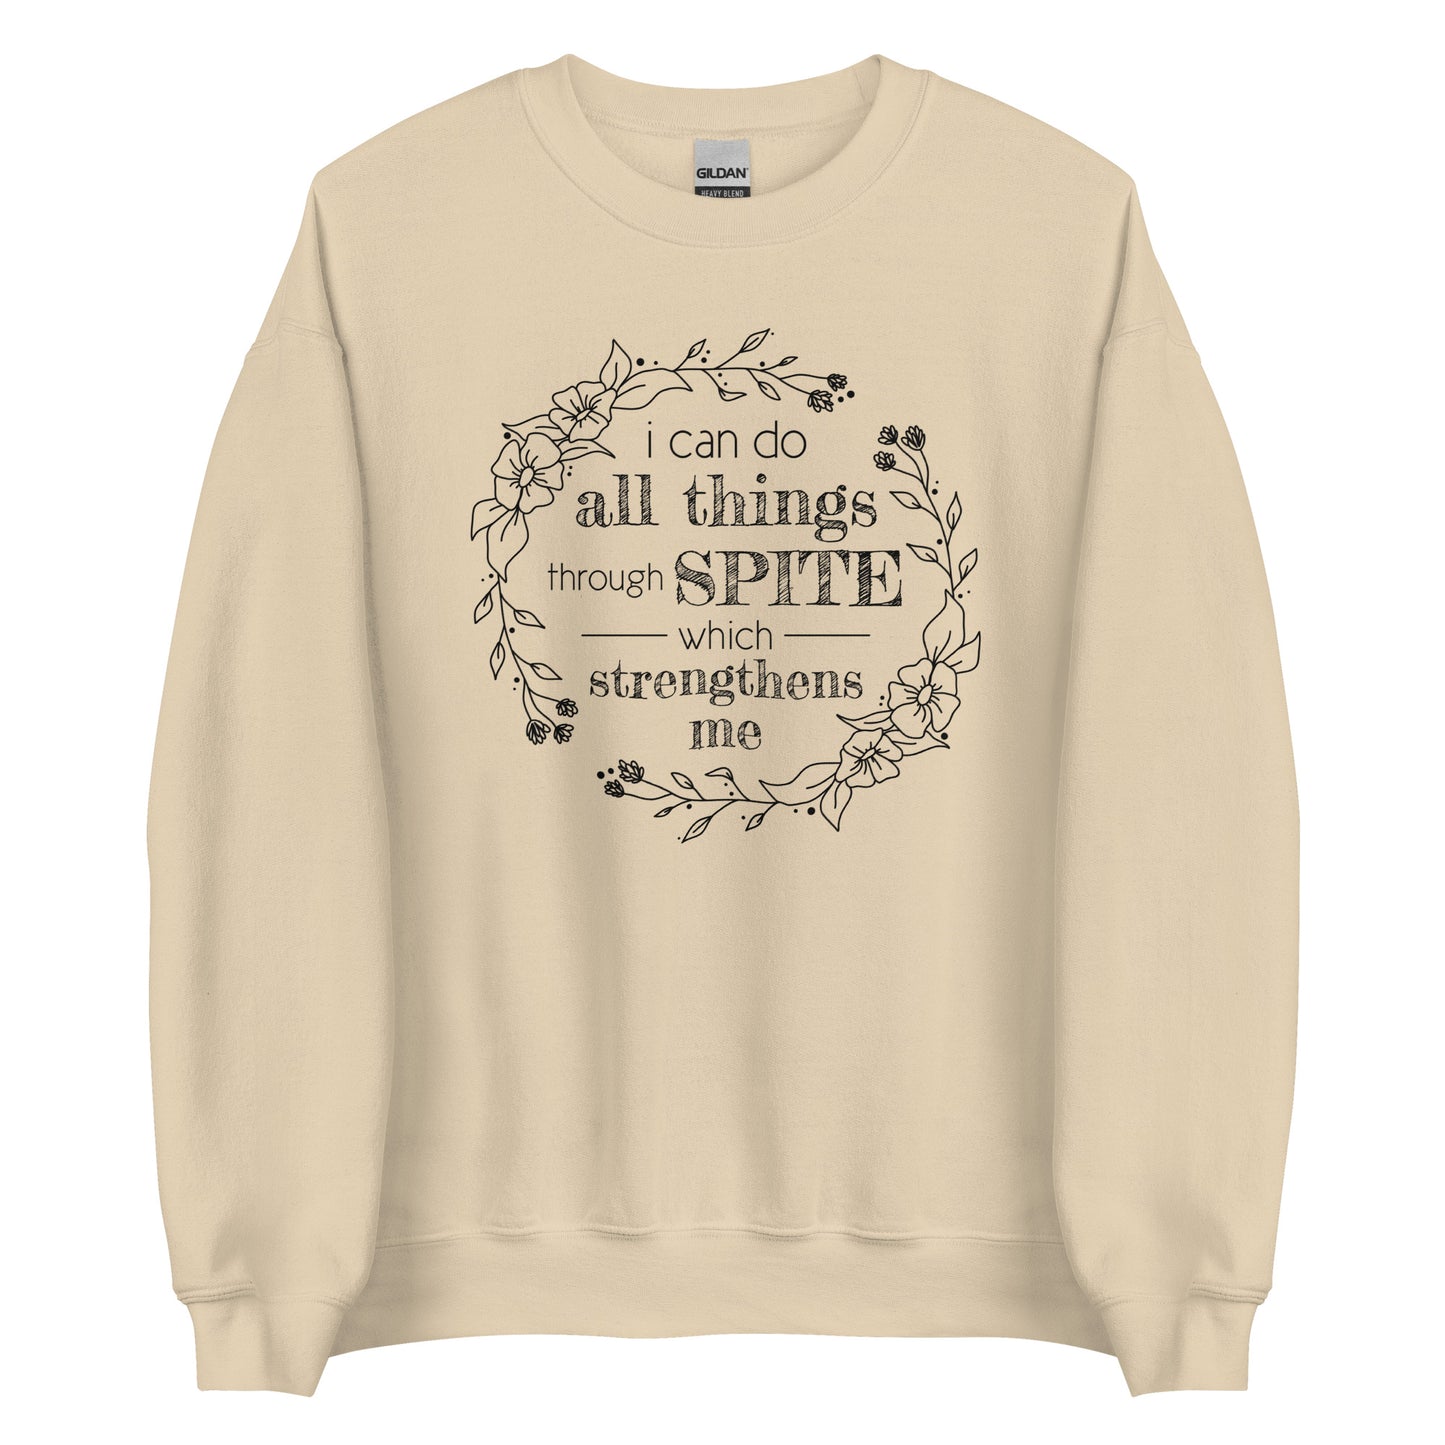 A tan crewneck sweatshirt featuring an illustration of a floral wreath. Text inside the flowers reads "i can do all things through SPITE which strengthens me"